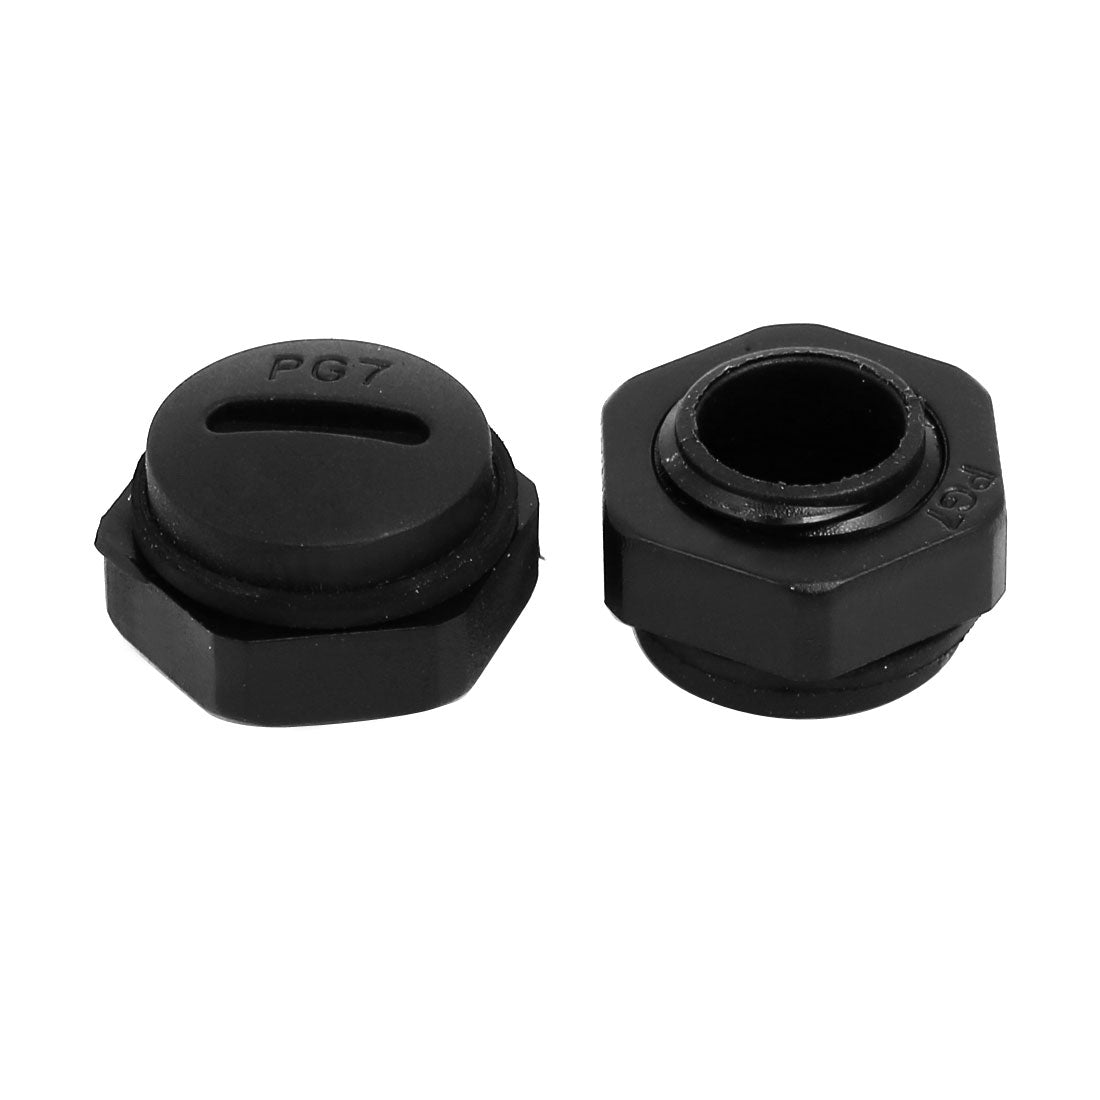 uxcell Uxcell PG7 Nylon Male Threaded Cable Gland Screw End Cap Cover Black 10pcs